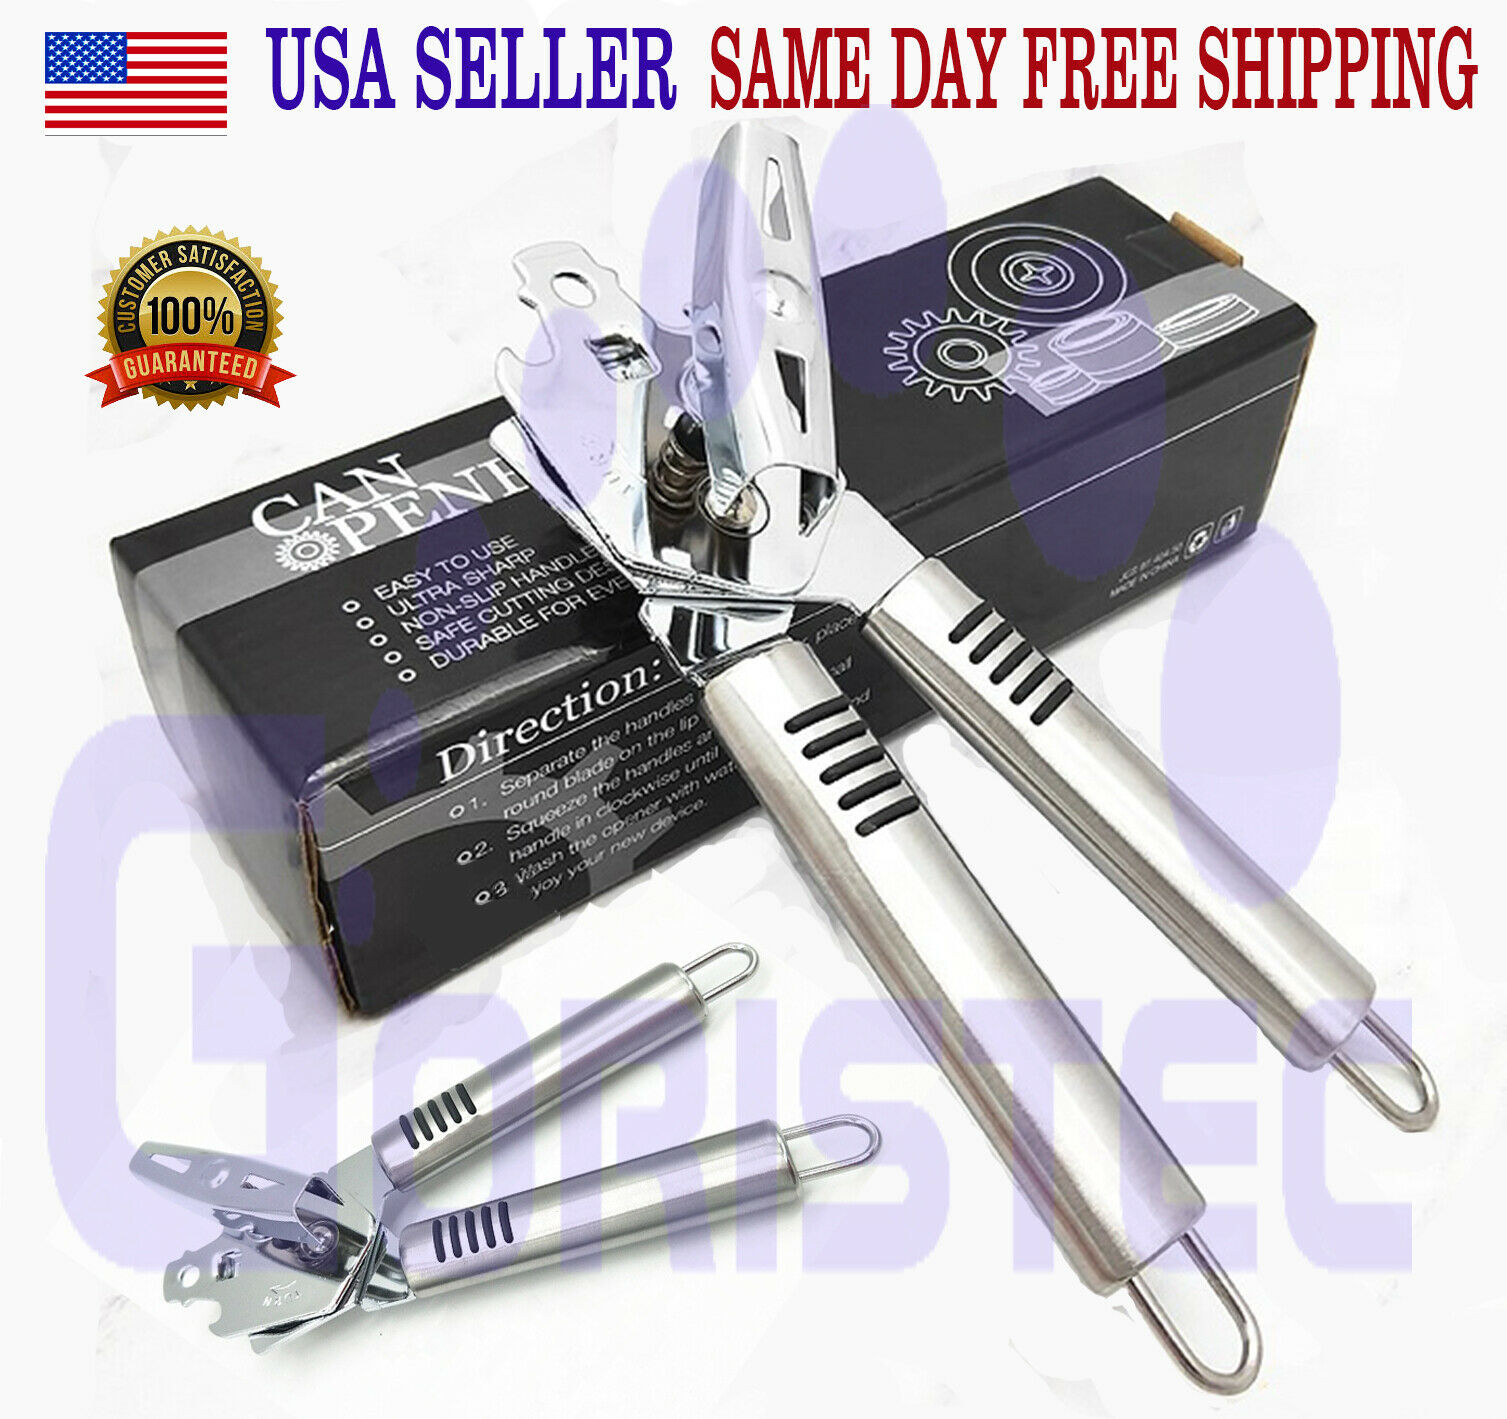 Premium Can Opener Stainless Steel Heavy Duty Blades Strong Professional Chef